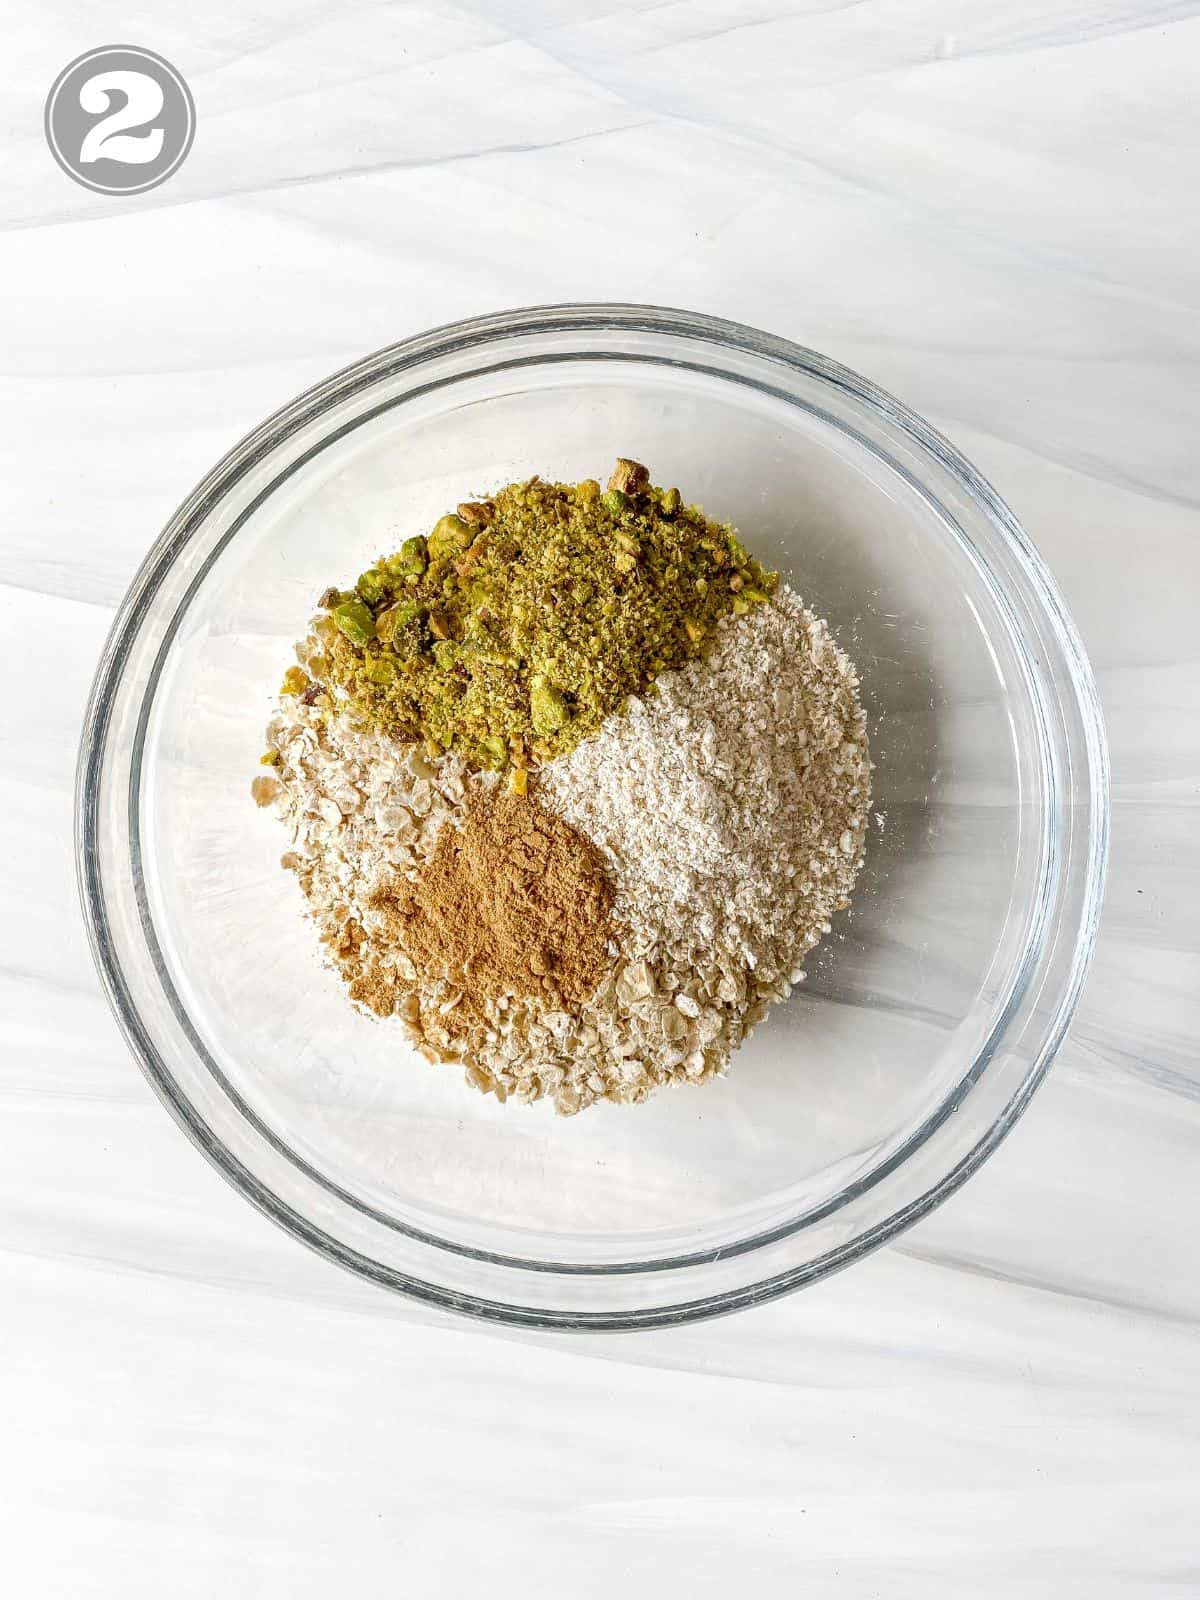 oats, ginger powder and pistachios in a glass bowl labelled number two.